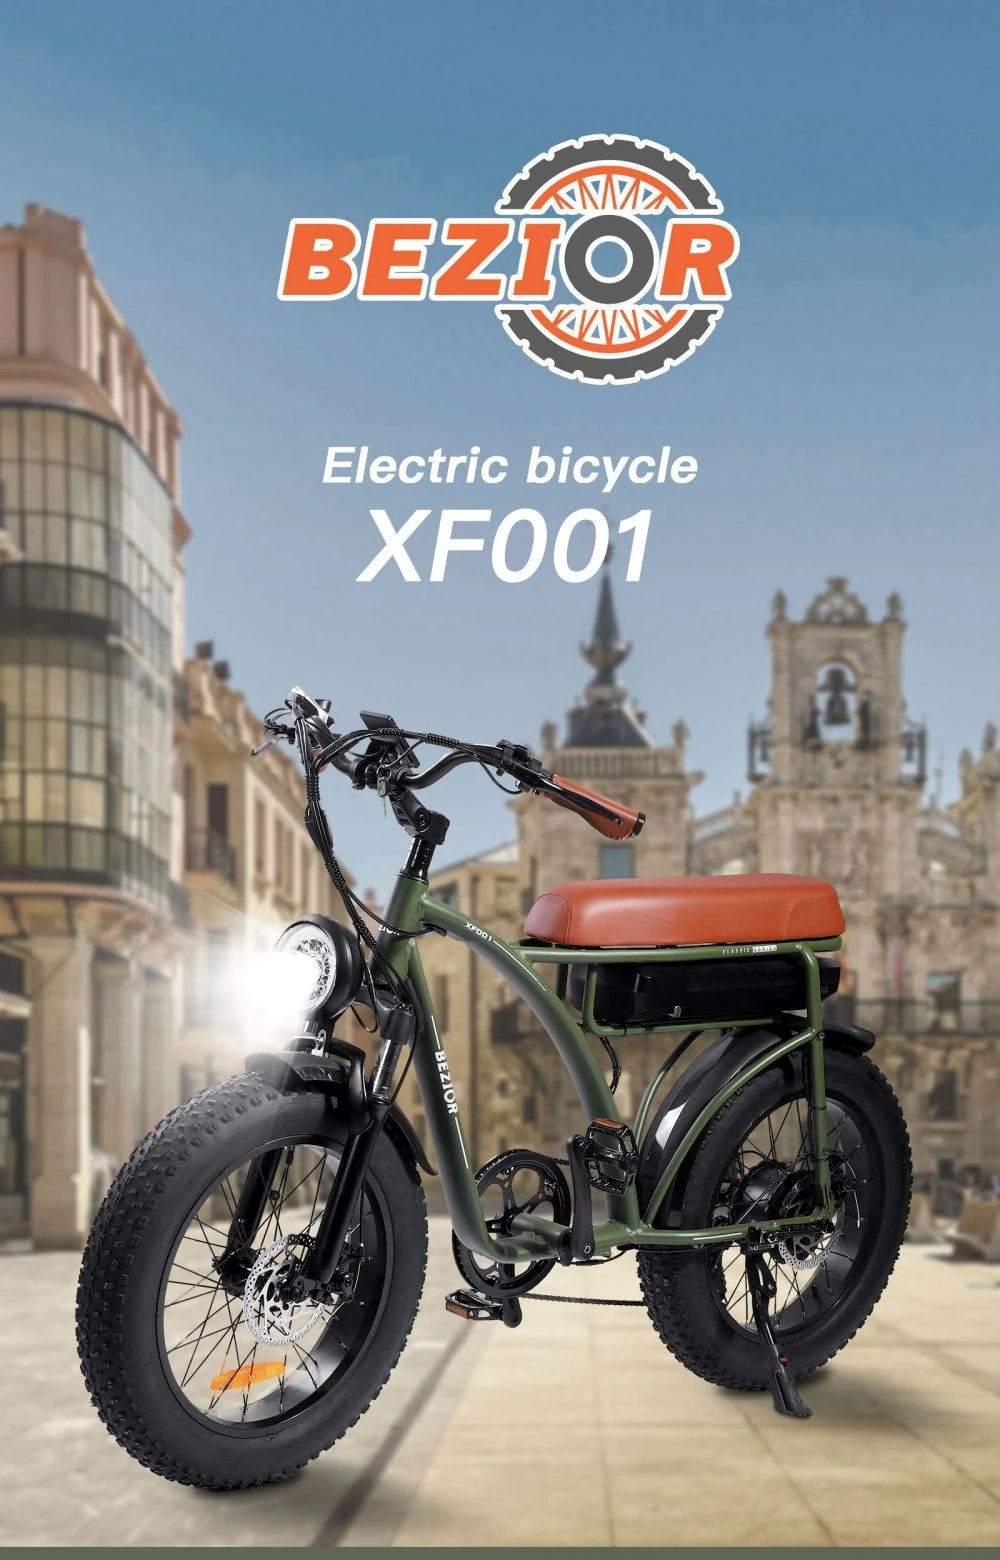 [US DIRECT] BEZIOR XF001 48V 12.5AH 1000W Electric Bicycle 20*4.0 Inch 35-37KM Mileage Range Max Load 120KG